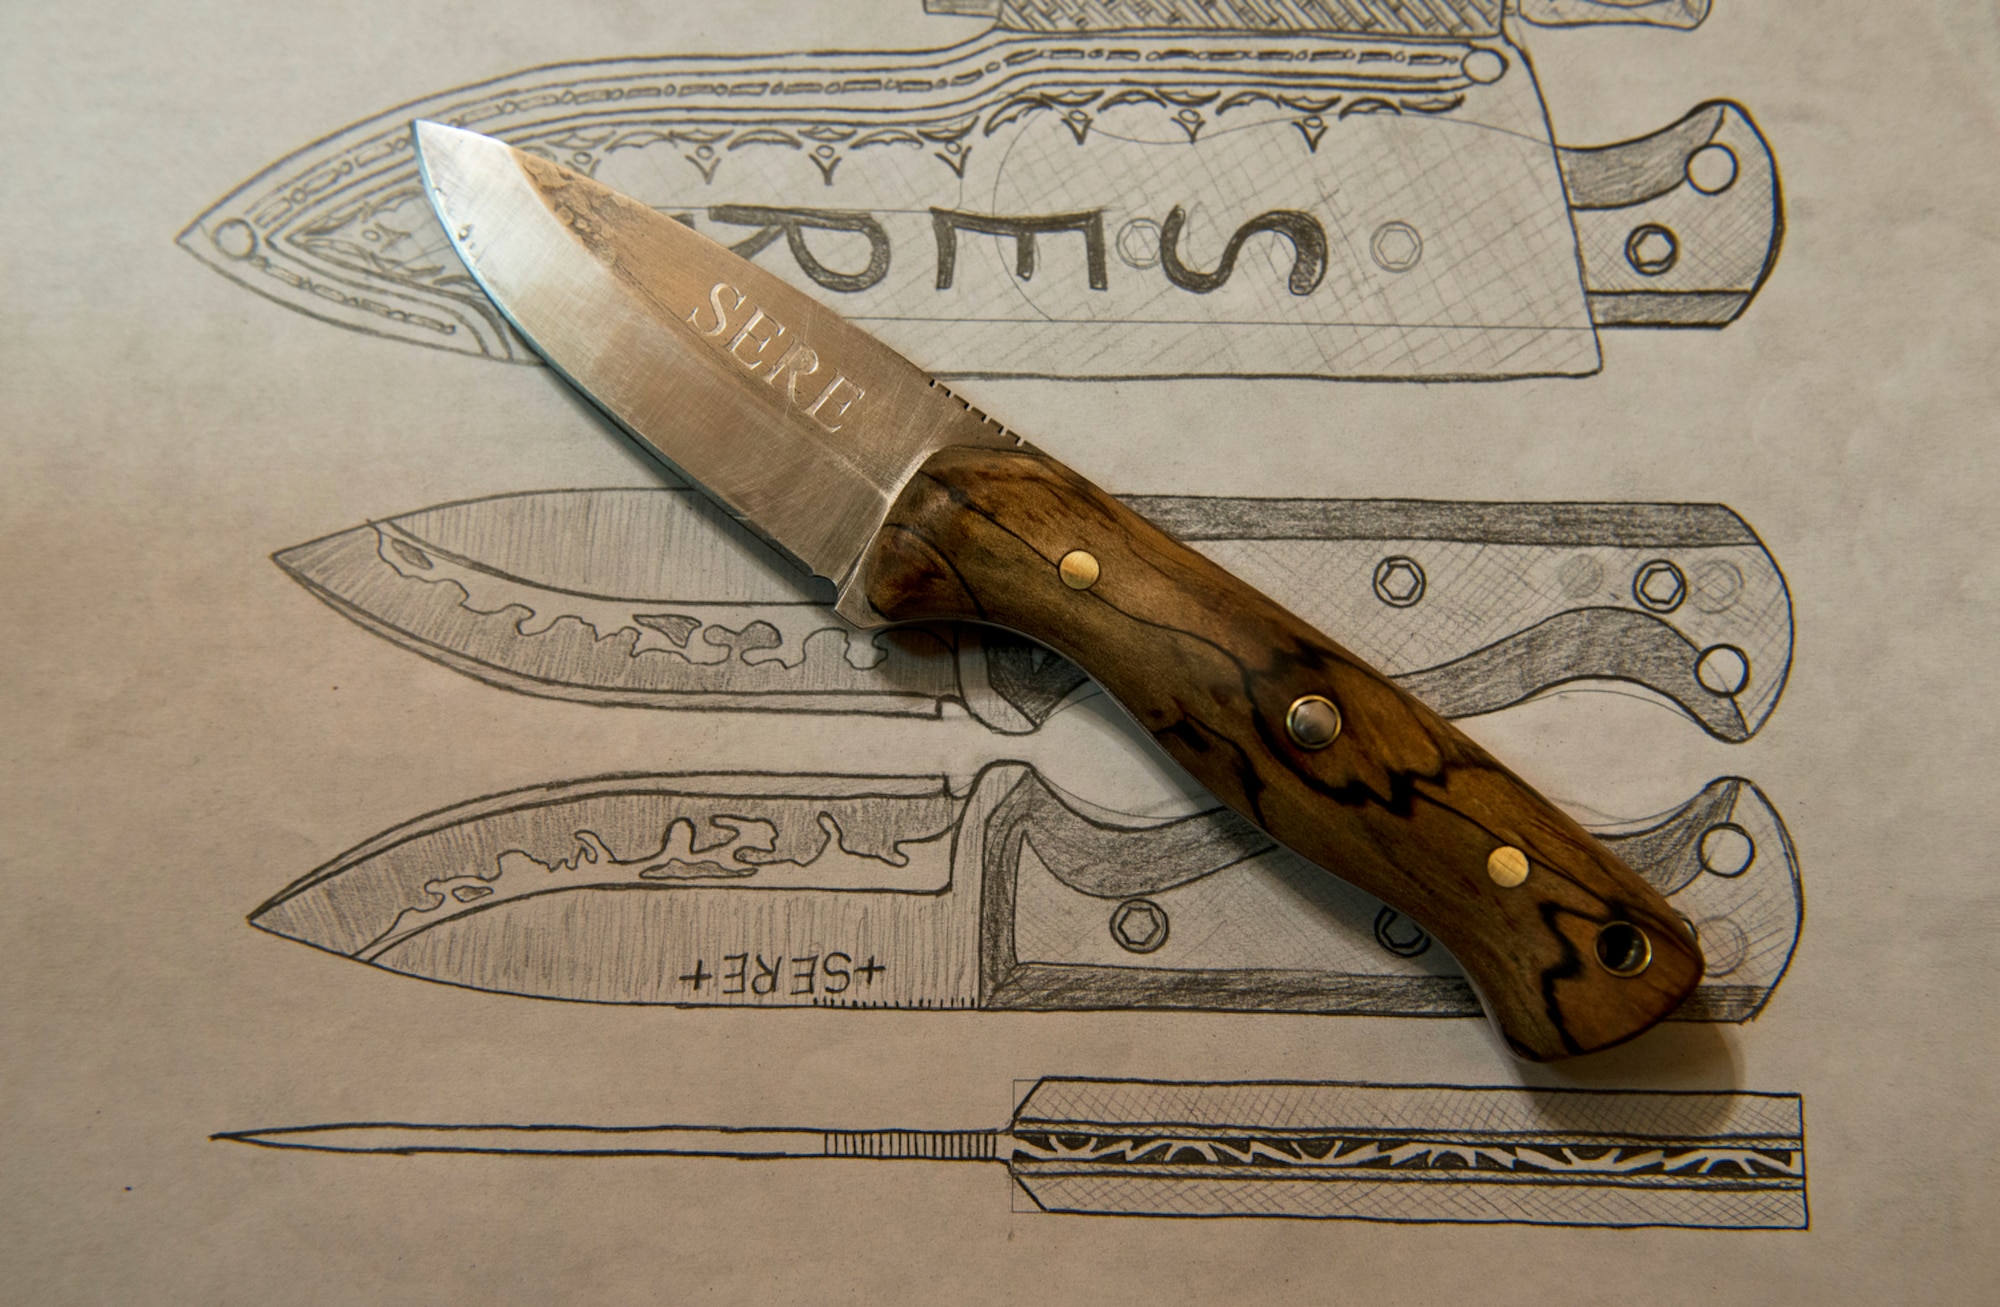 A completed survival, evasion, resistance and escape inspired custom knife by SERE instructor Senior Airman Joseph Collett. Collett likens the molding and shaping of steel in creating a knife with the same goal of SERE, to molding and shaping stronger Airman through survival training. (U.S. Air Force photo/Tech. Sgt. Bennie J. Davis III)